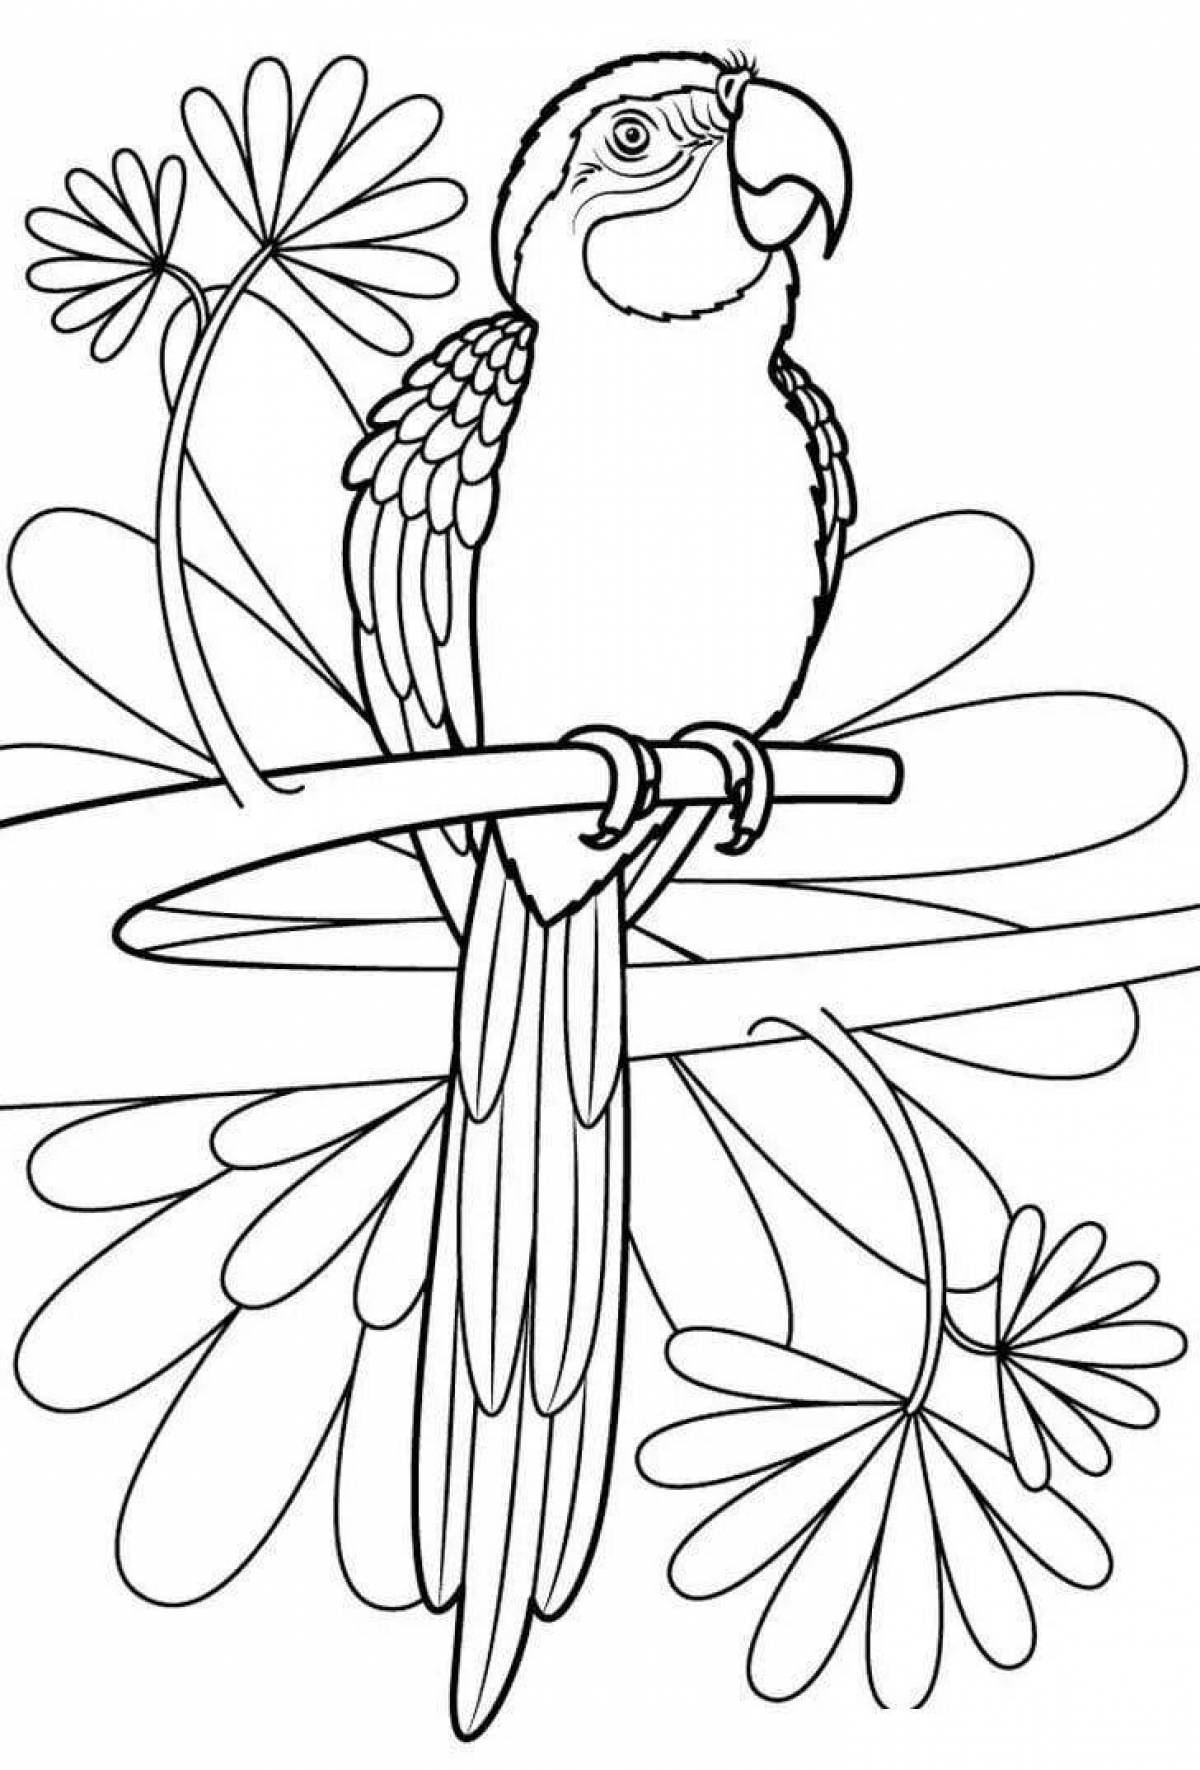 Adorable parrot coloring book for kids